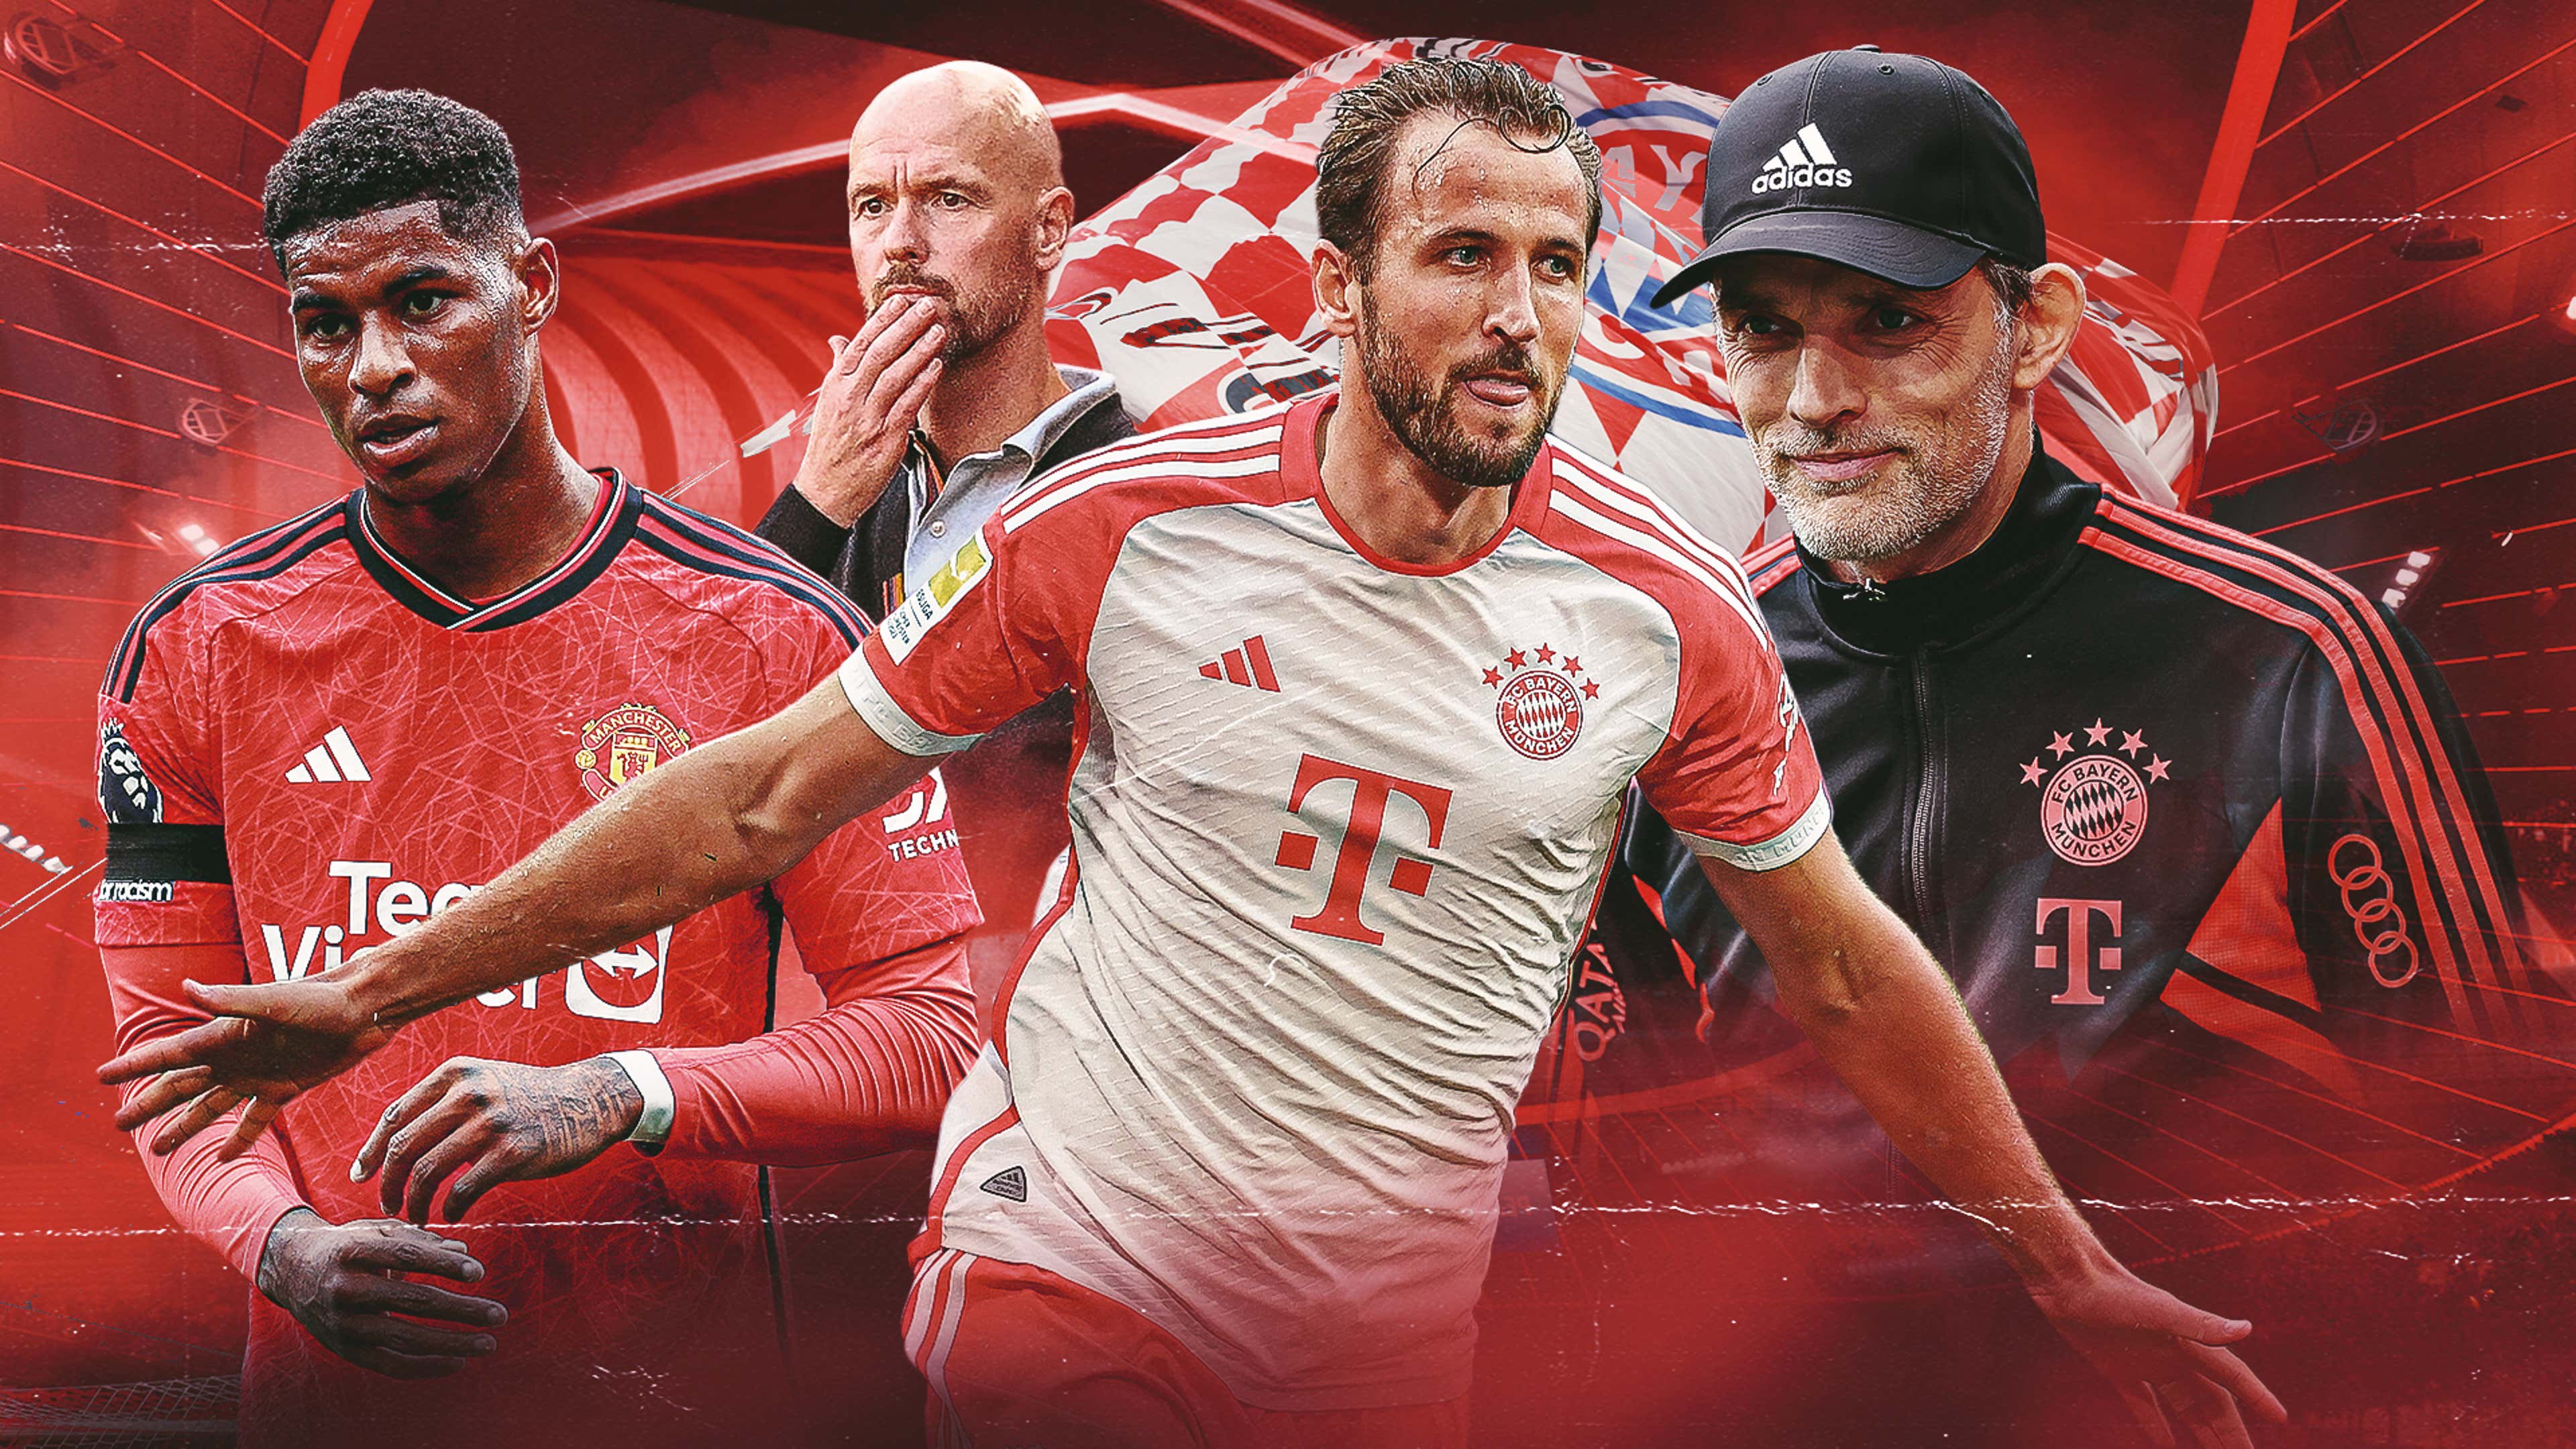 Bayern Munich and Man Utd are now miles apart - only the Bundesliga side  can challenge for the Champions League after going all out for Harry Kane |  Goal.com